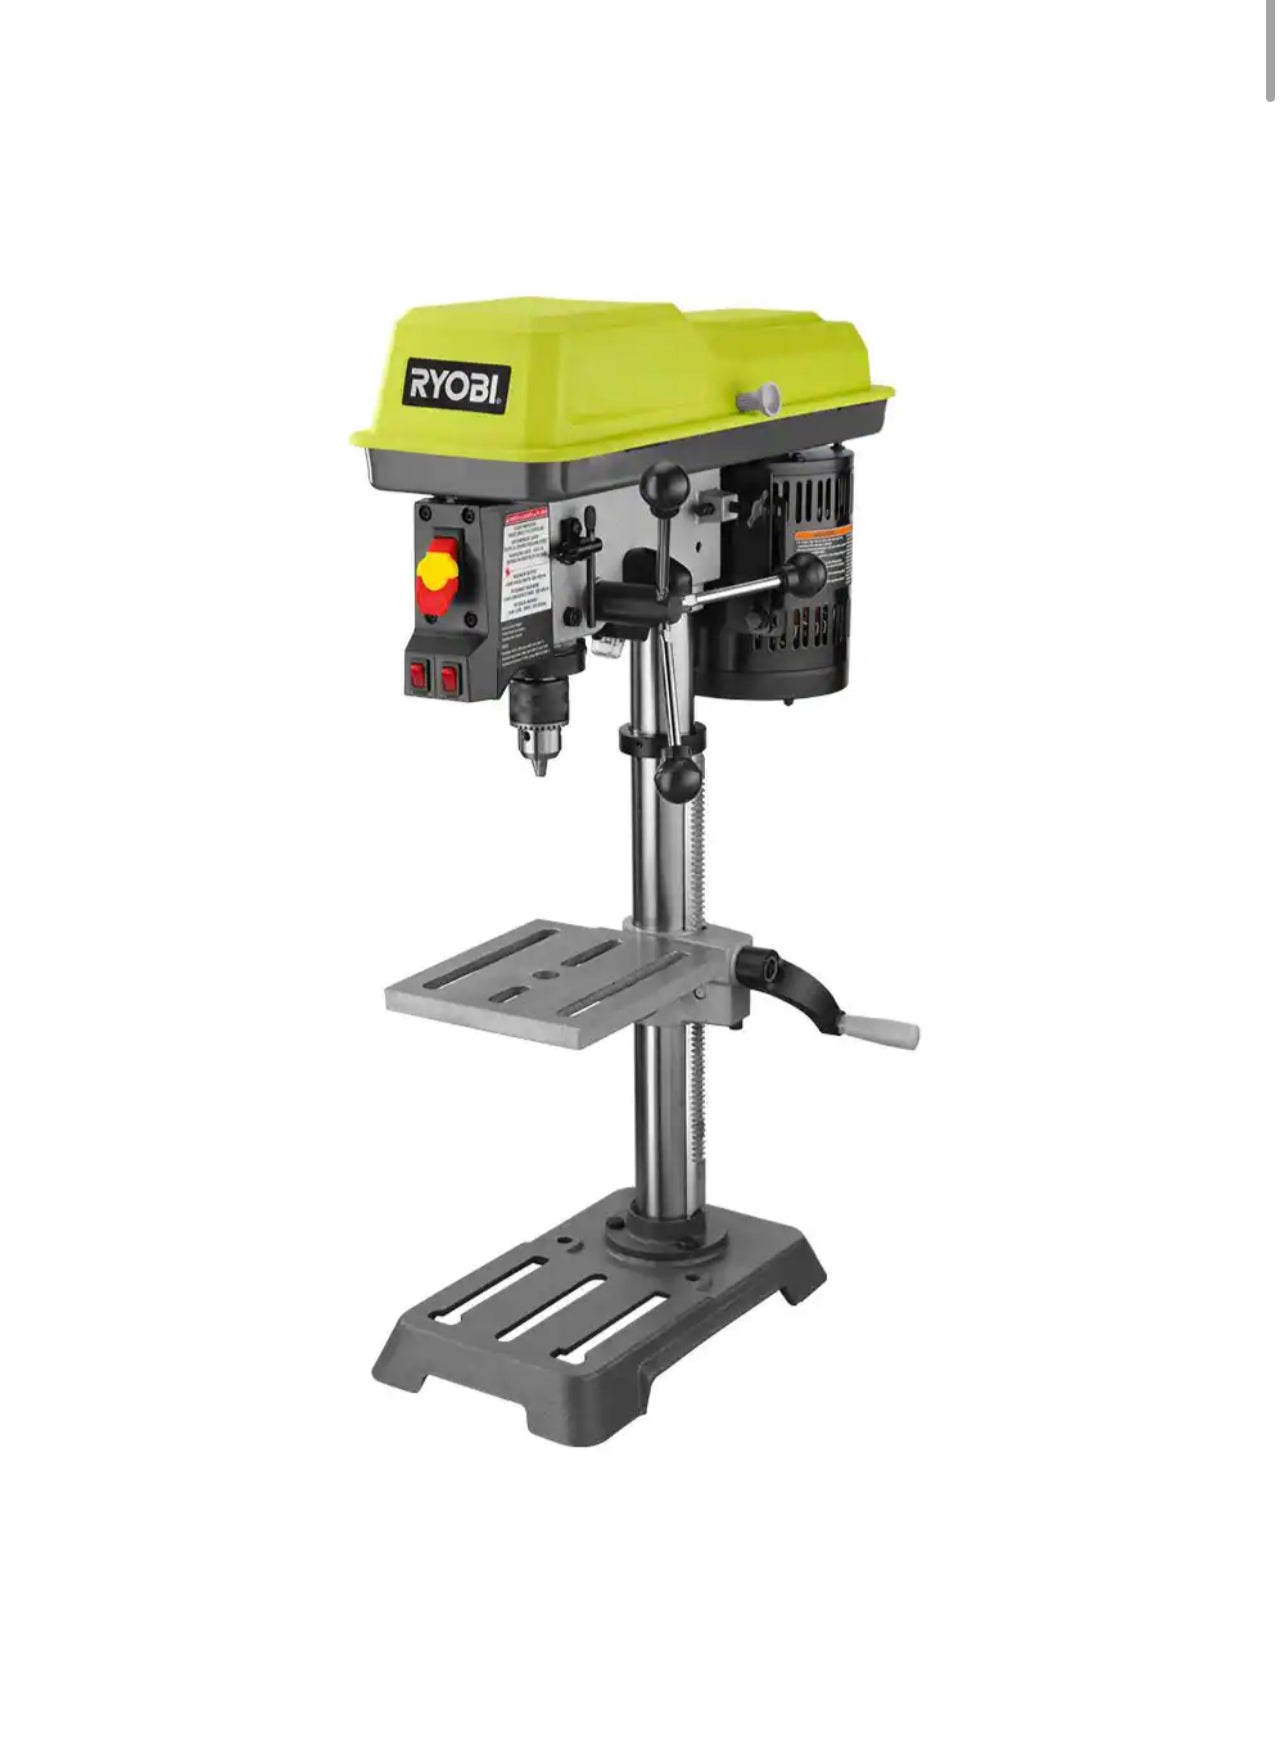 Ryobi 10 in. 5 Speed Drill Press with Exactline Laser Alignment System Damaged Box